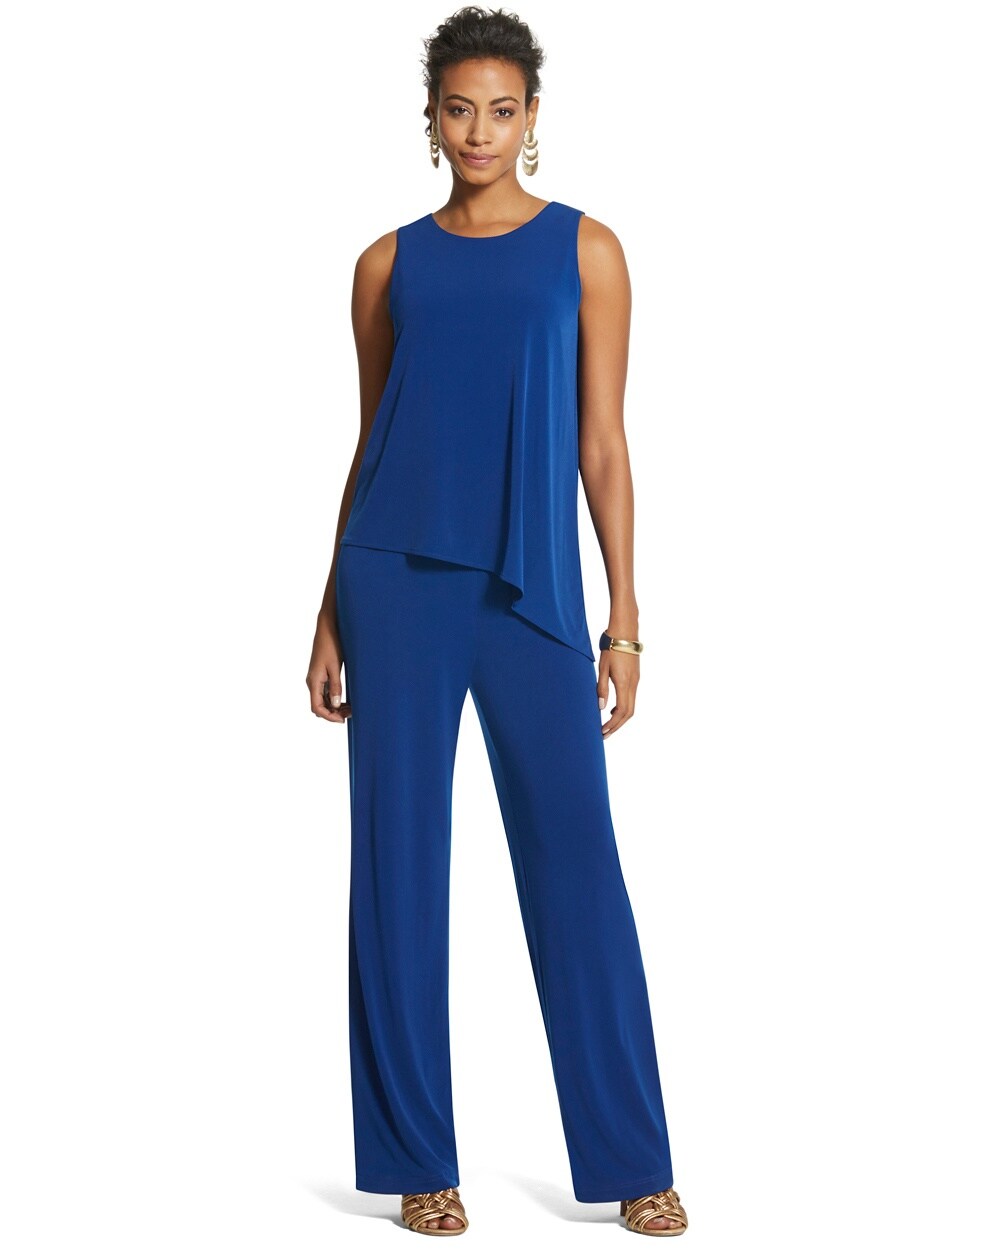 Knit Kit Angled Jumpsuit - Chico's